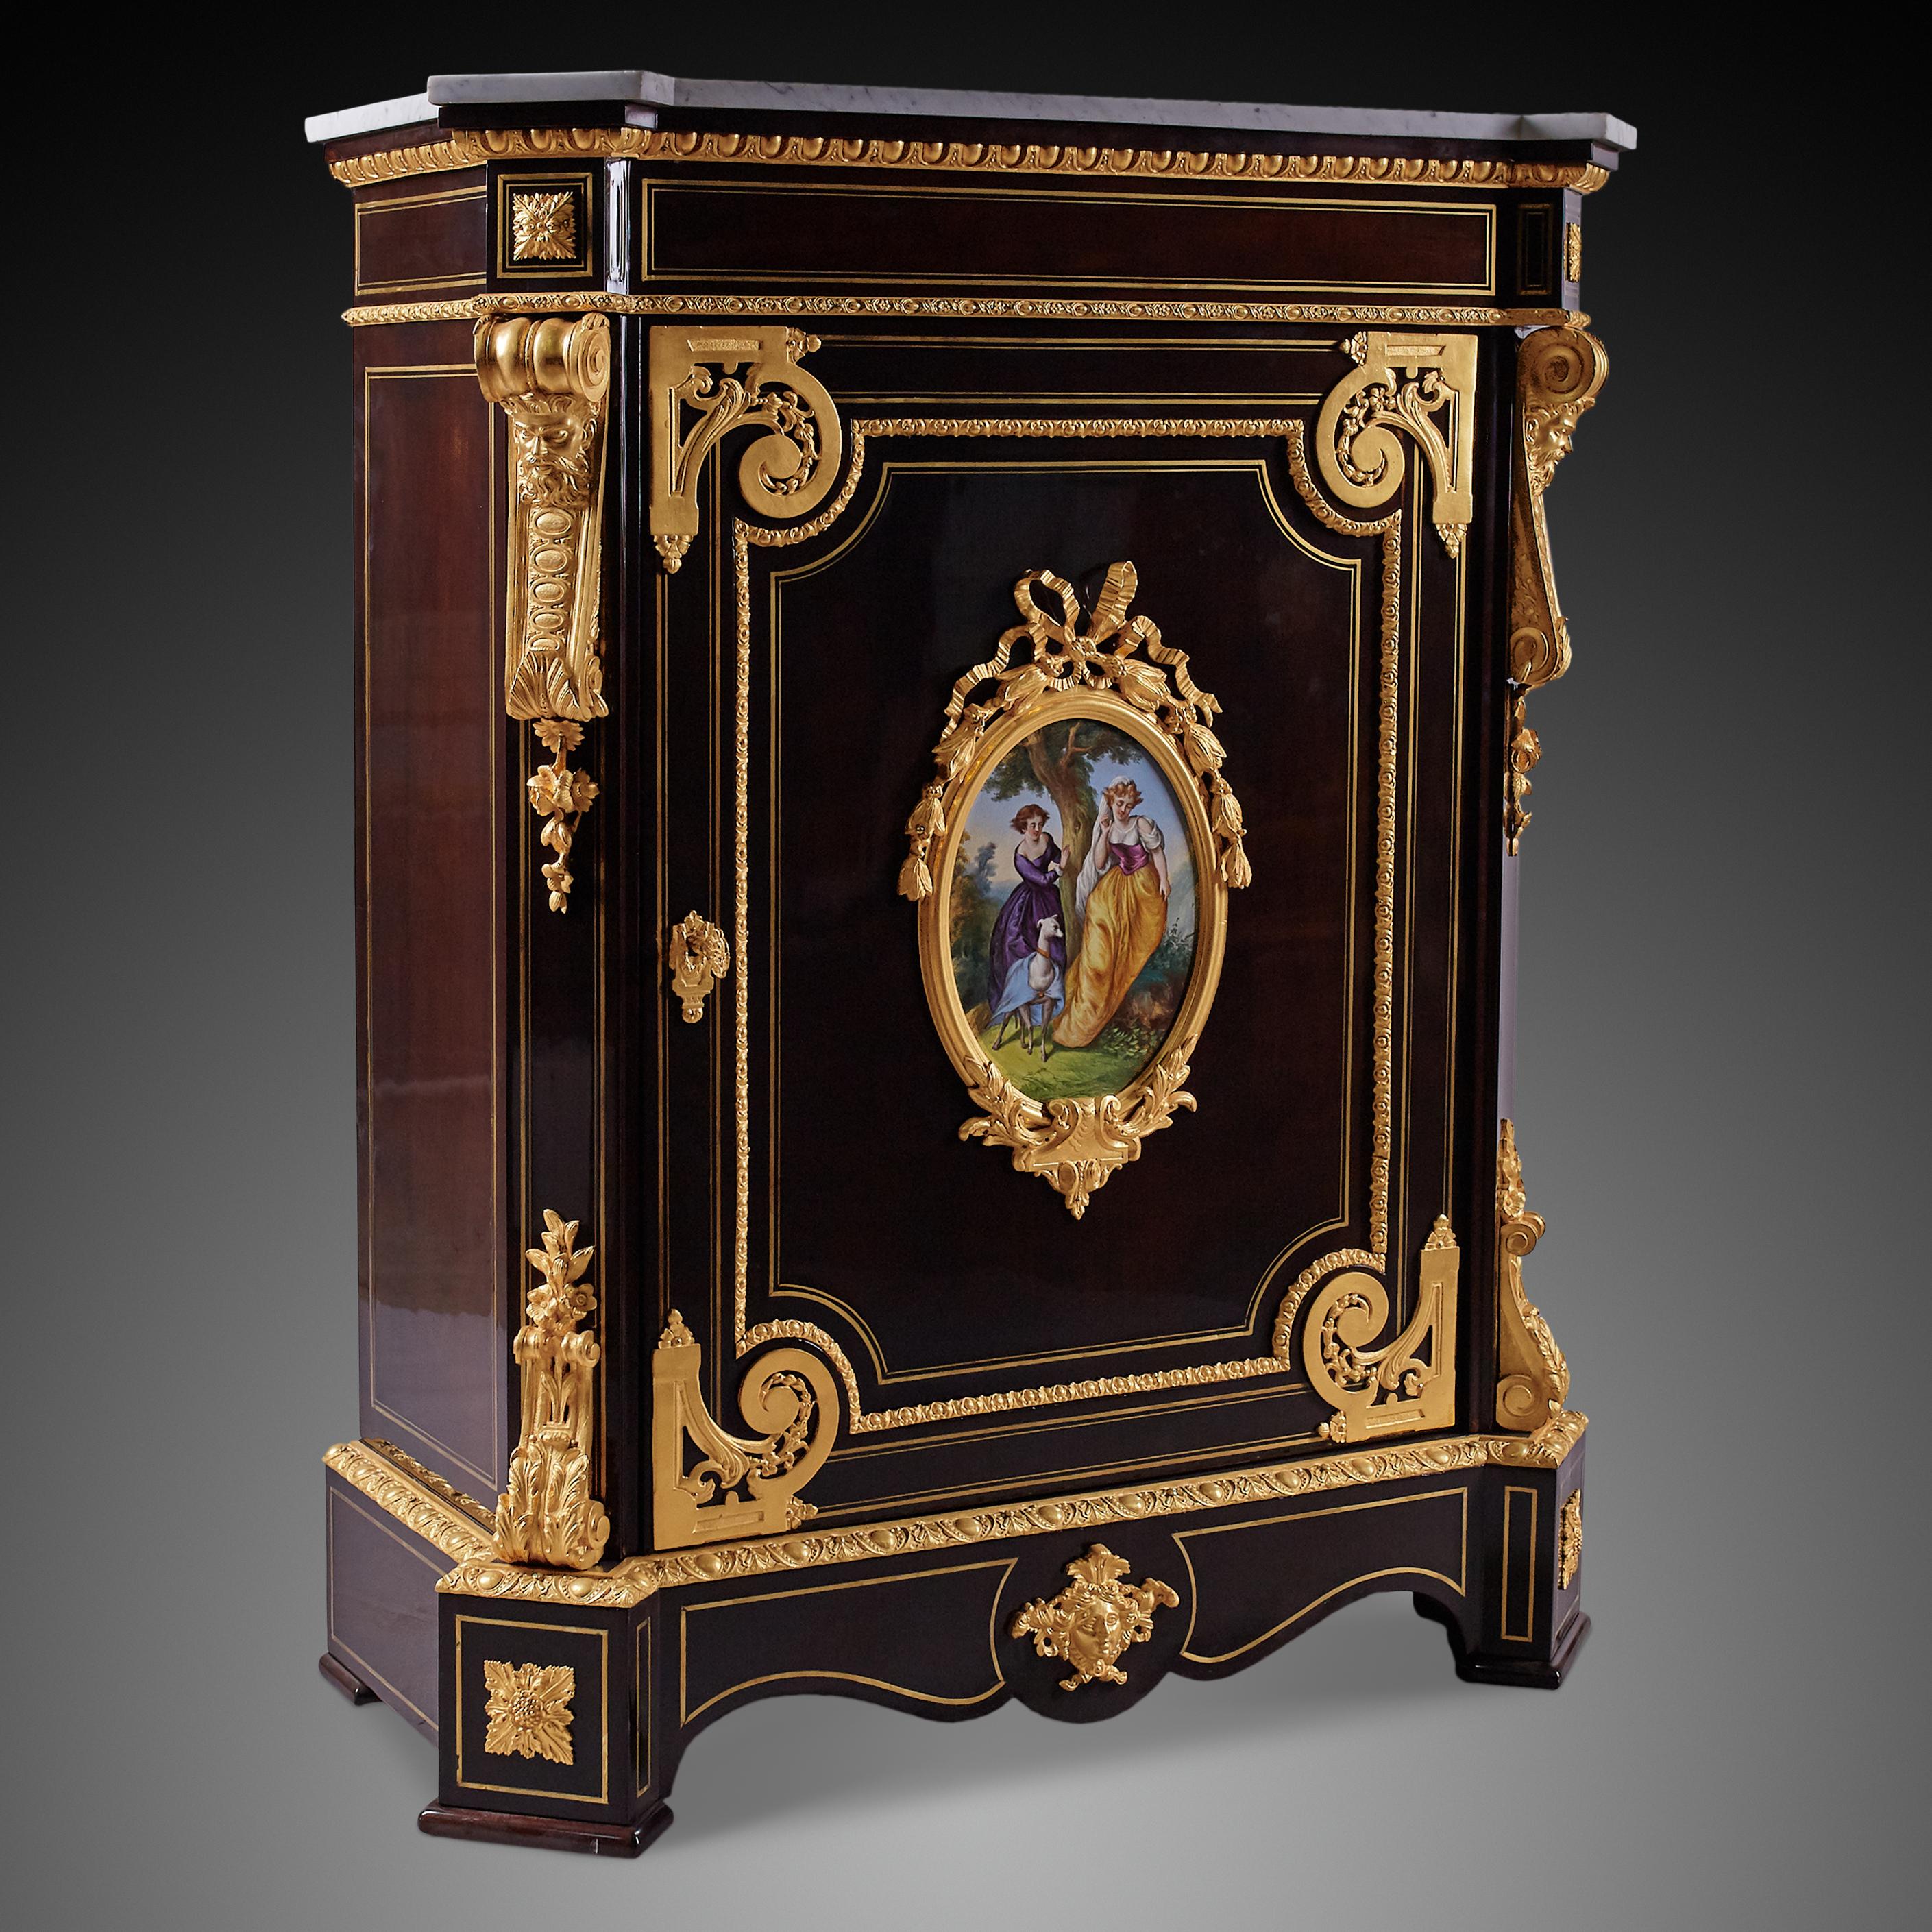 The cabinet is crafted in Napoleon III style, which is also known as Second empire style. The main material of the cabinet is ebony with dark varnish finish. The top of the cabinet iscovered with  Carrara marble, which was a popular combination of